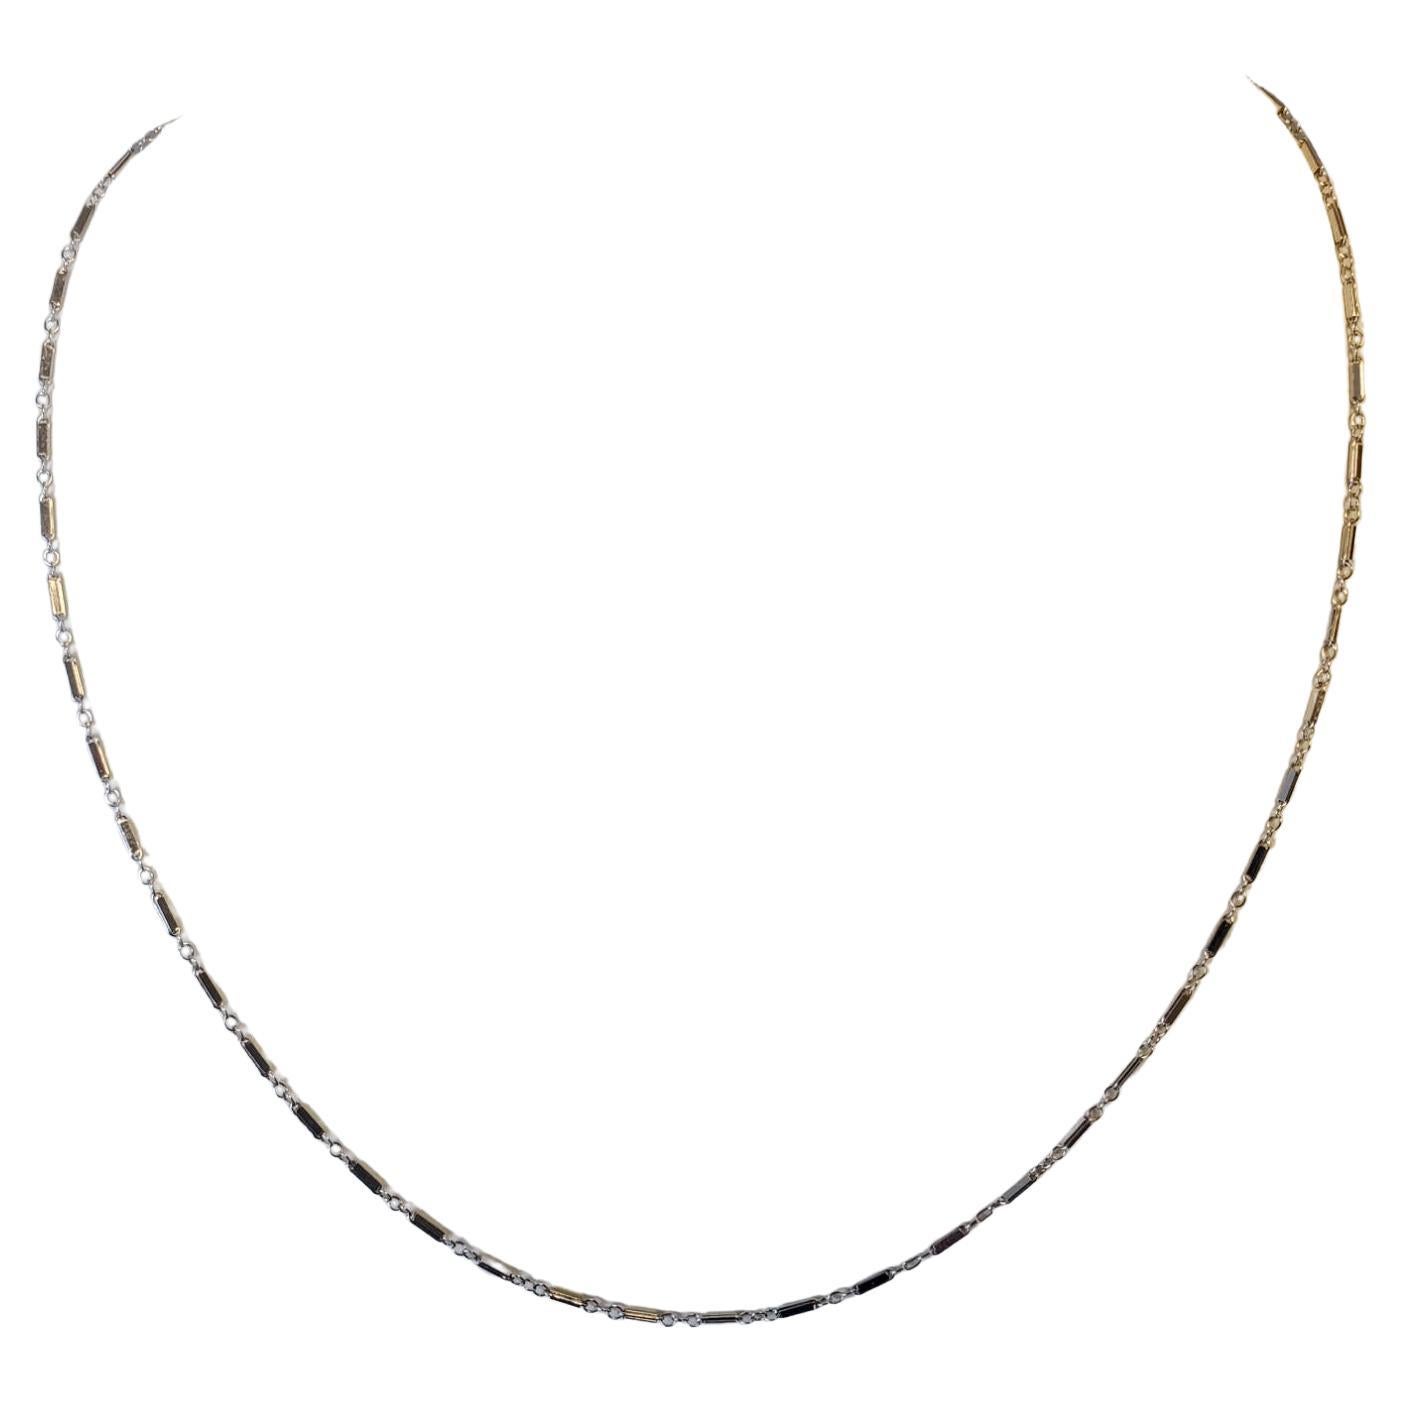 Vintage 14k Chain White Gold Stamped Link and Bar Pattern Minimalistic Necklace For Sale